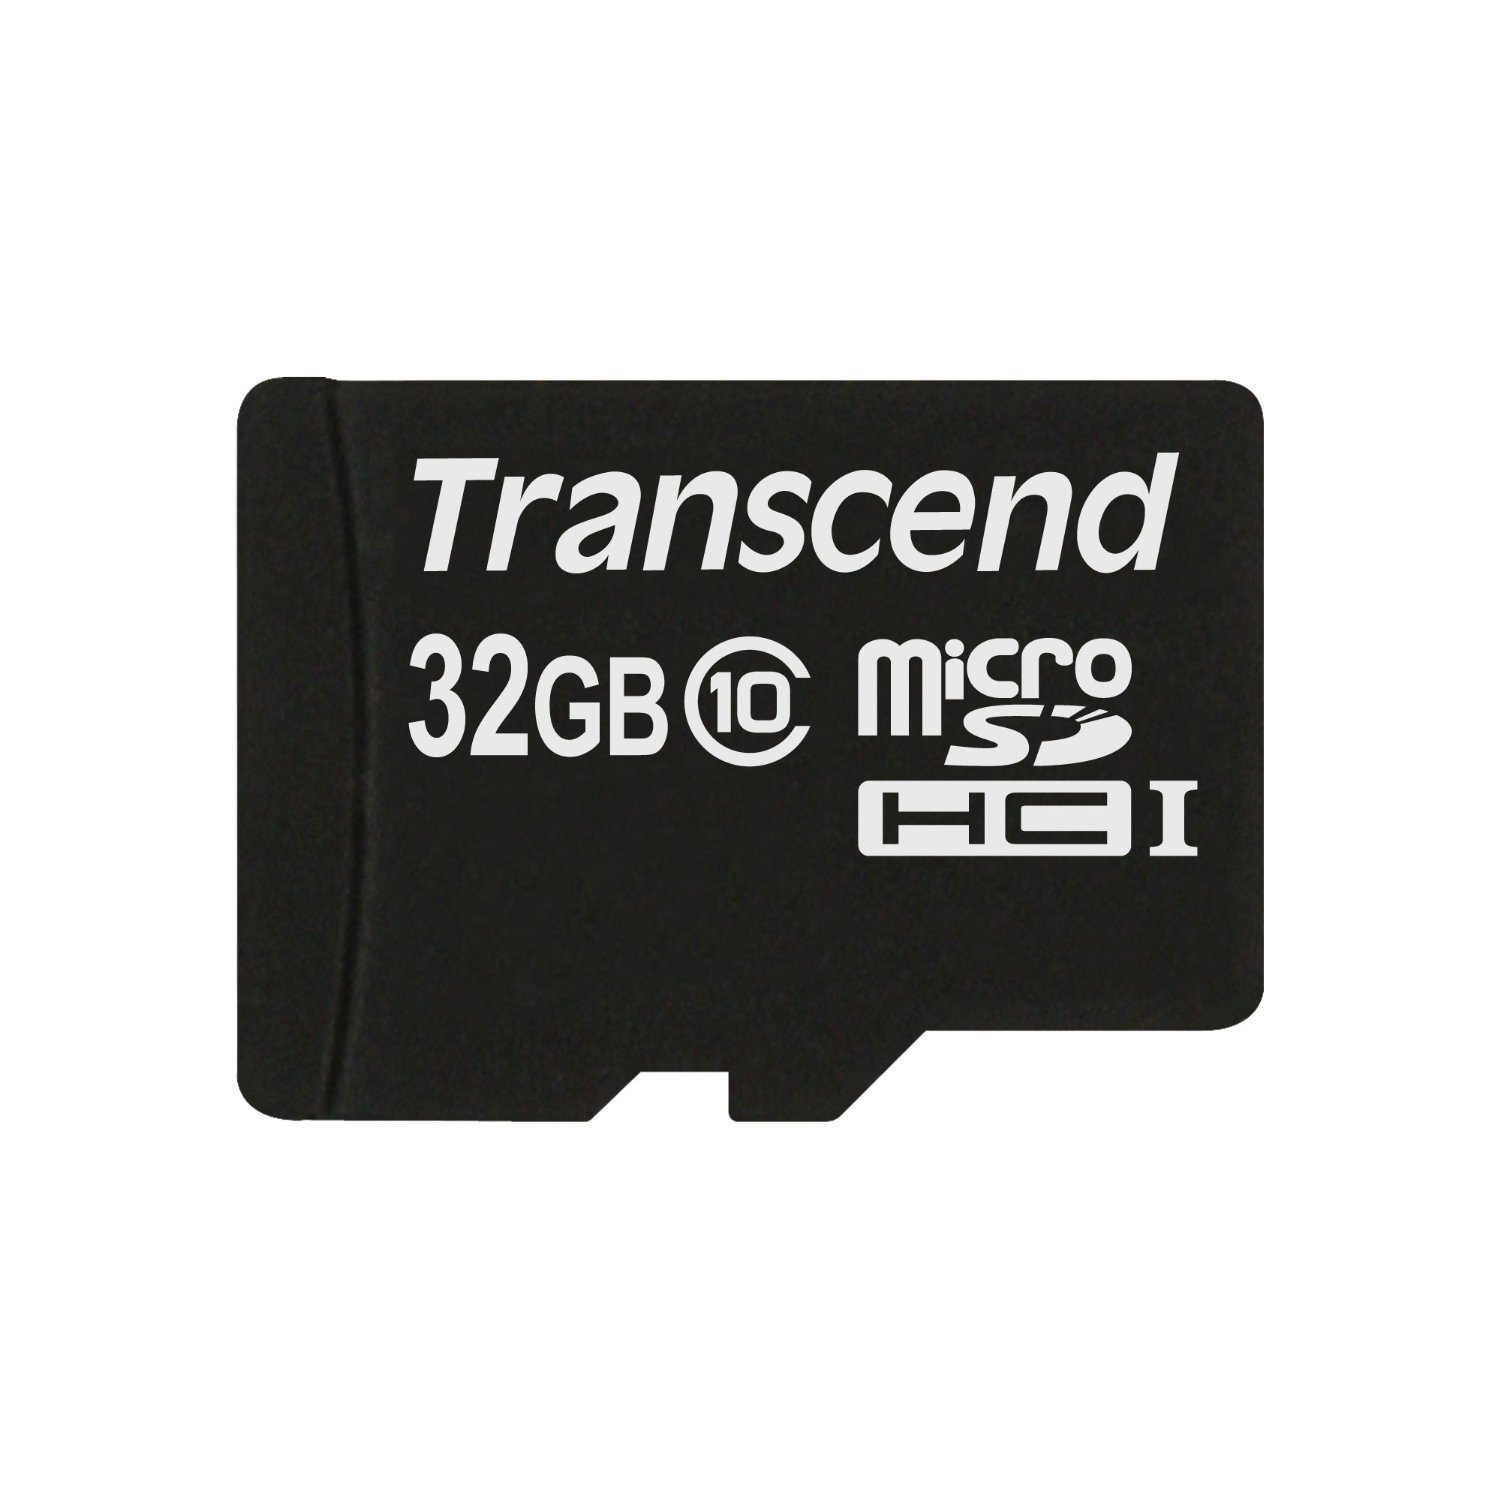 Transcend 32GB MicroSDHC Class10 Memory Card with Adapter 30 MB/s (TS32GUSDHC10) - image 2 of 3